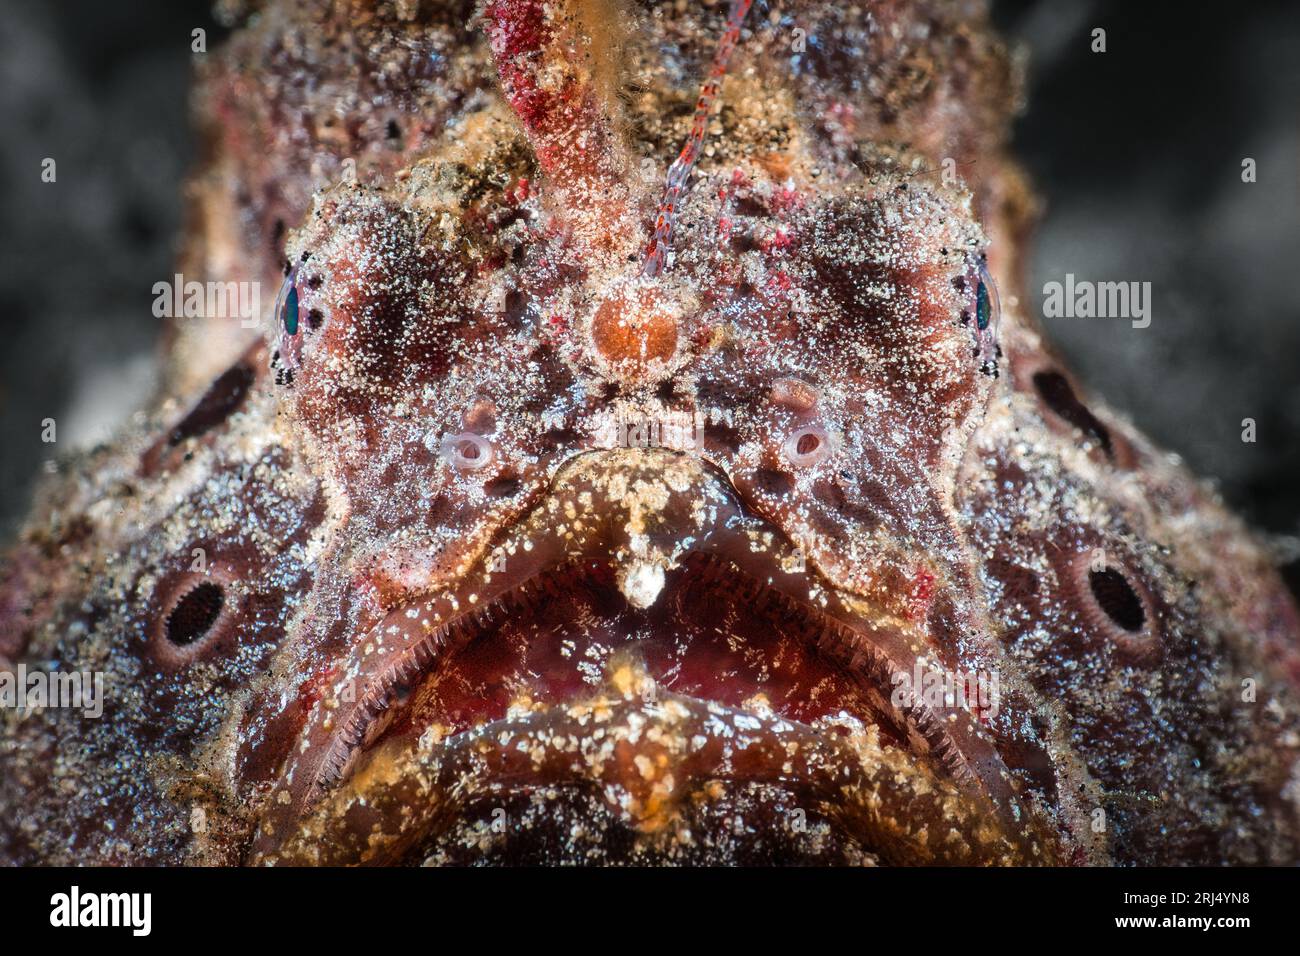 Anglerfish, also known as Frogfish here well camouflages in Lembeh Strait Stock Photo